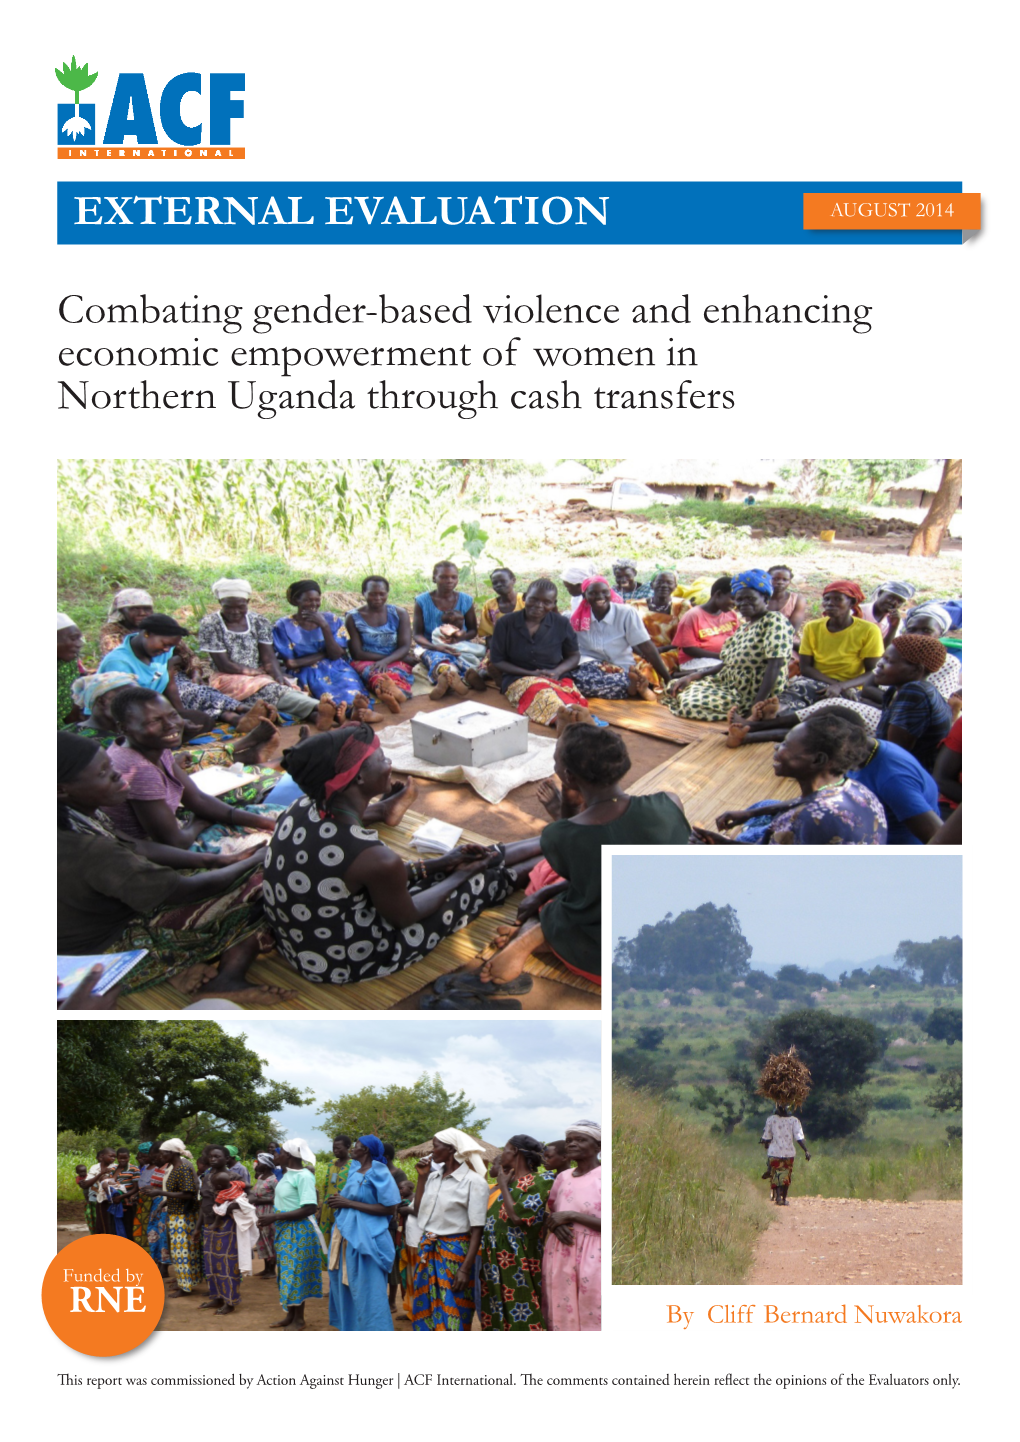 Combating Gender-Based Violence and Enhancing Economic Empowerment of Women in Northern Uganda Through Cash Transfers